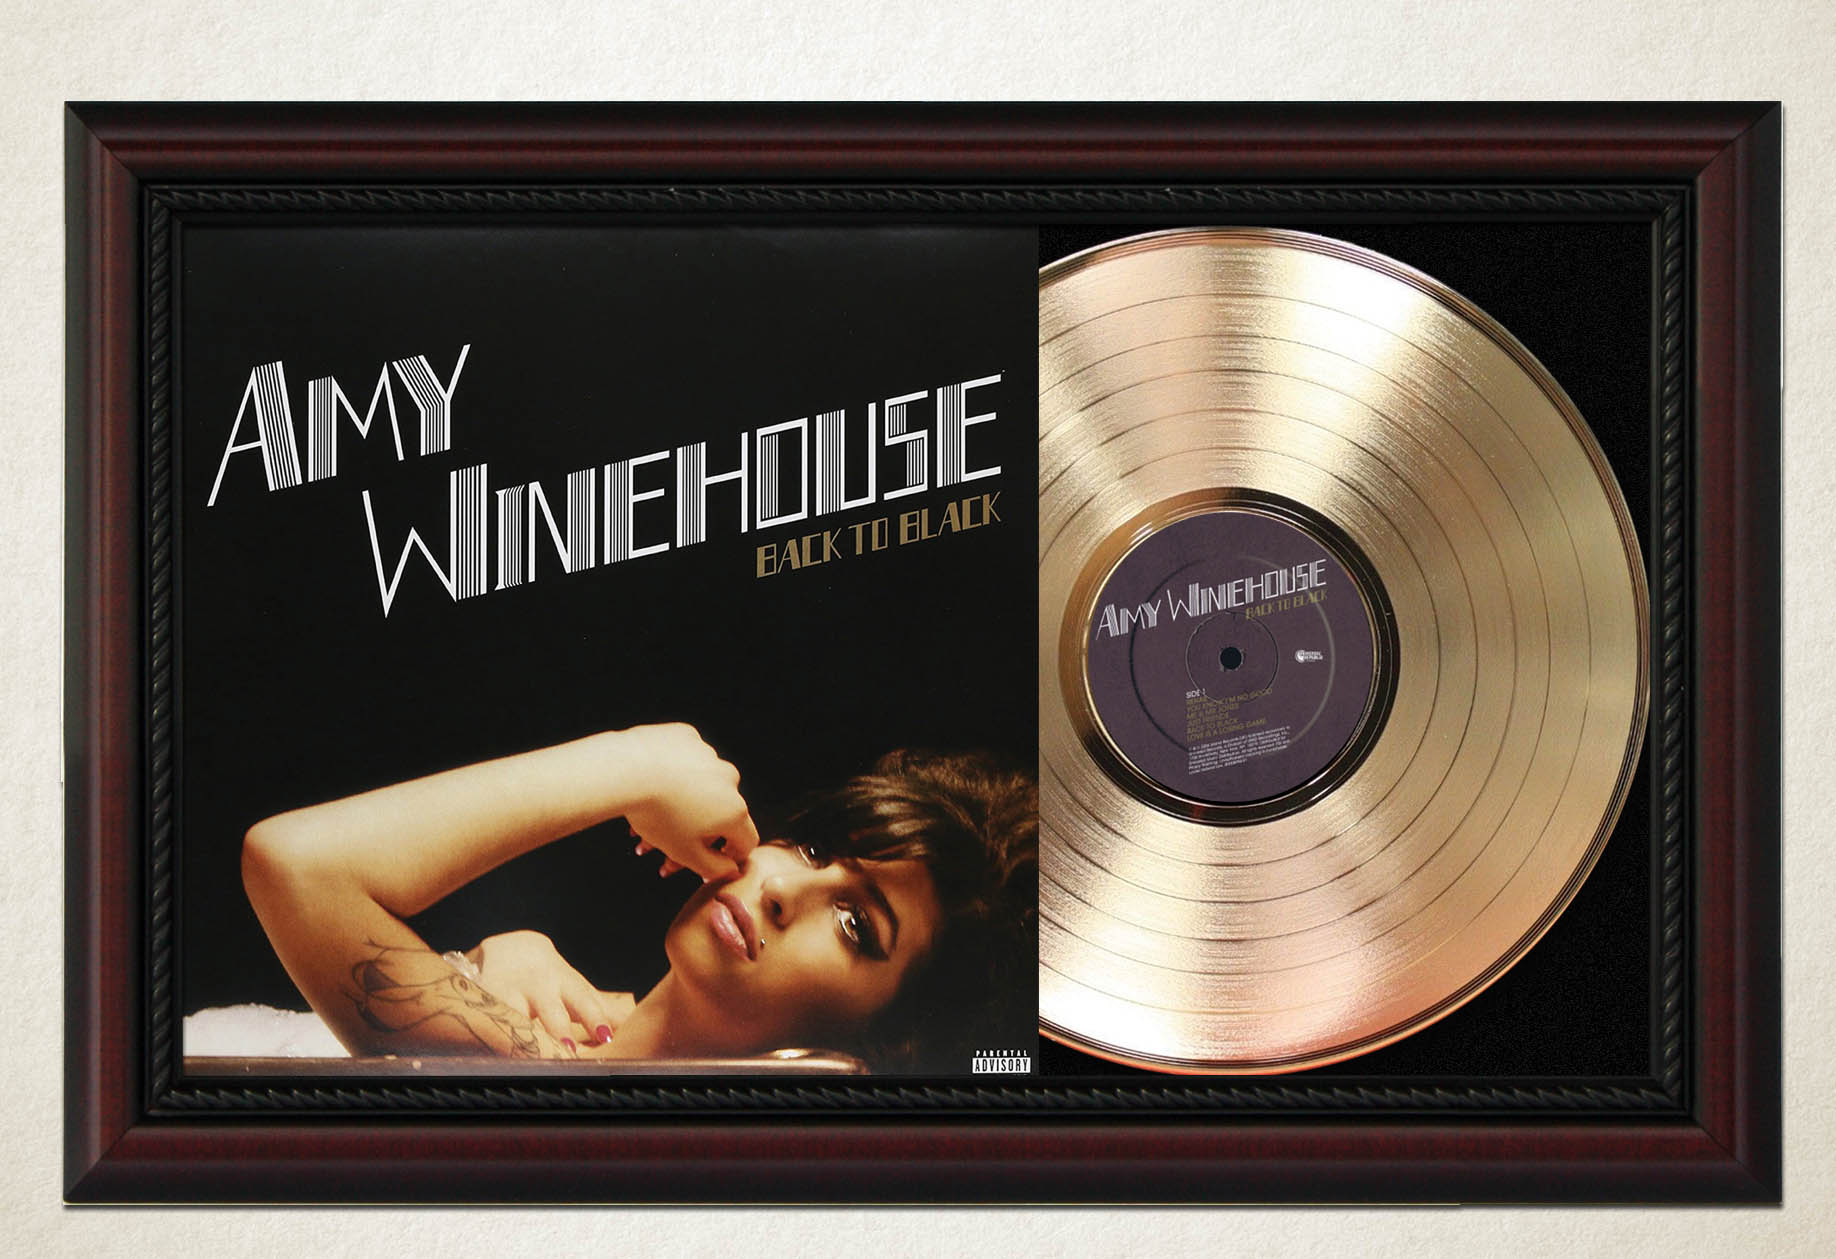 Amy Winehouse - Back To Black Framed Signature Gold LP Record Display M4 -  Gold Record Outlet Album and Disc Collectible Memorabilia